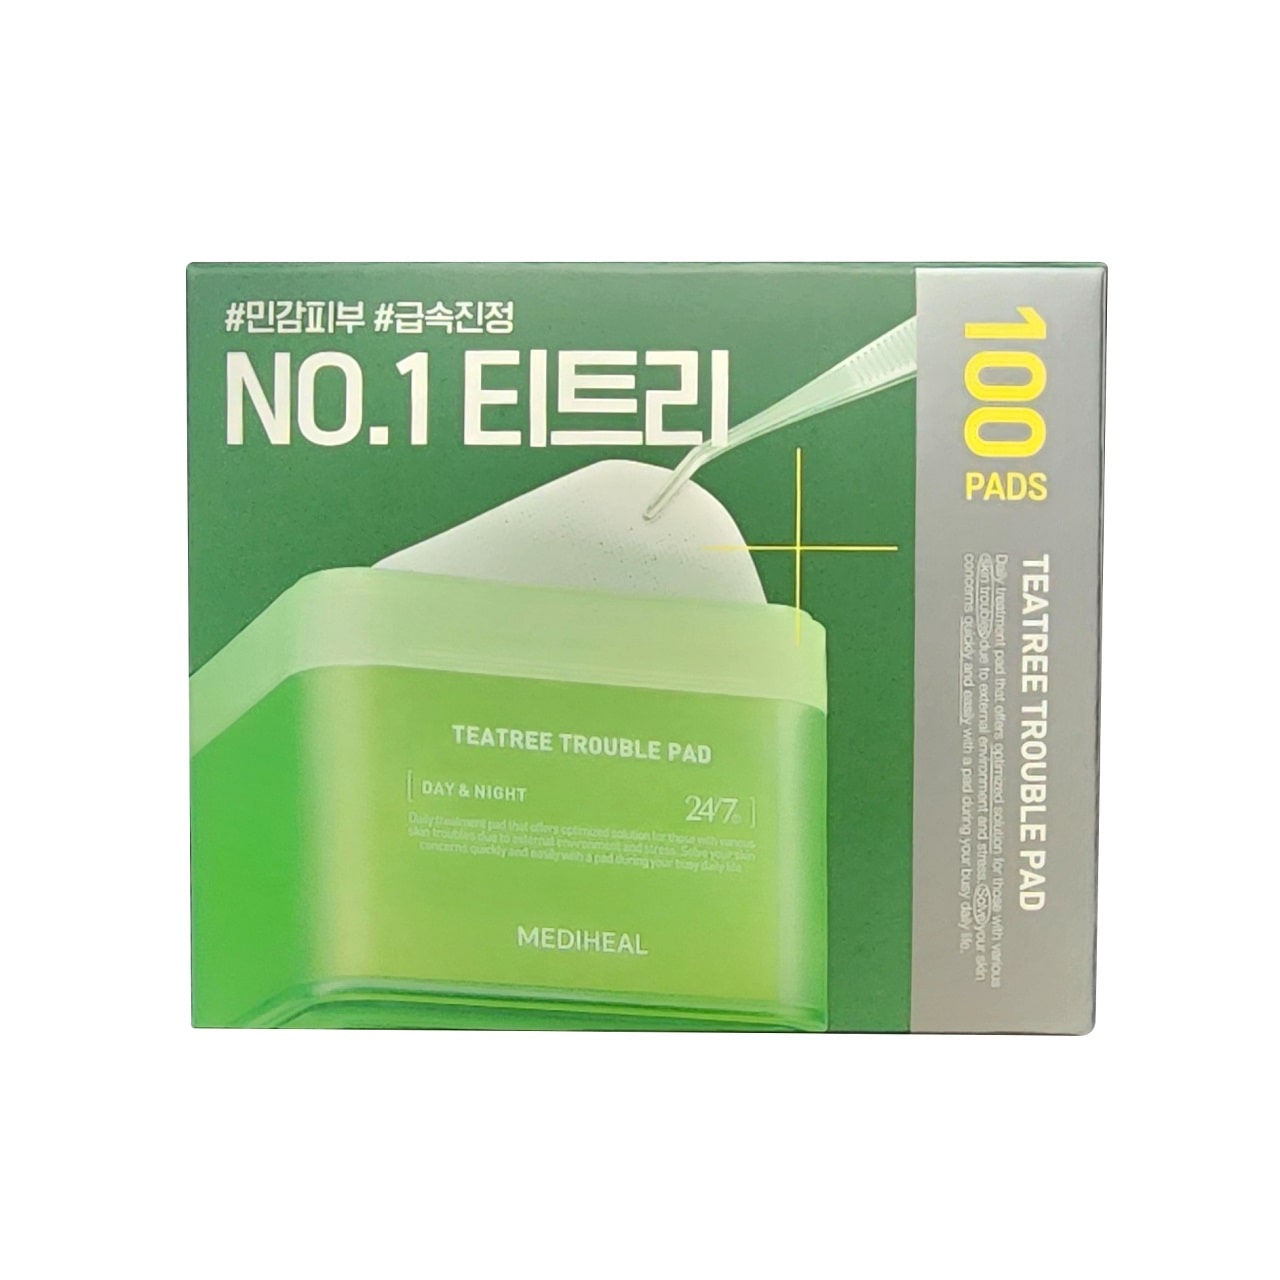 Product label for Mediheal Teatree Trouble Pad (100 count)